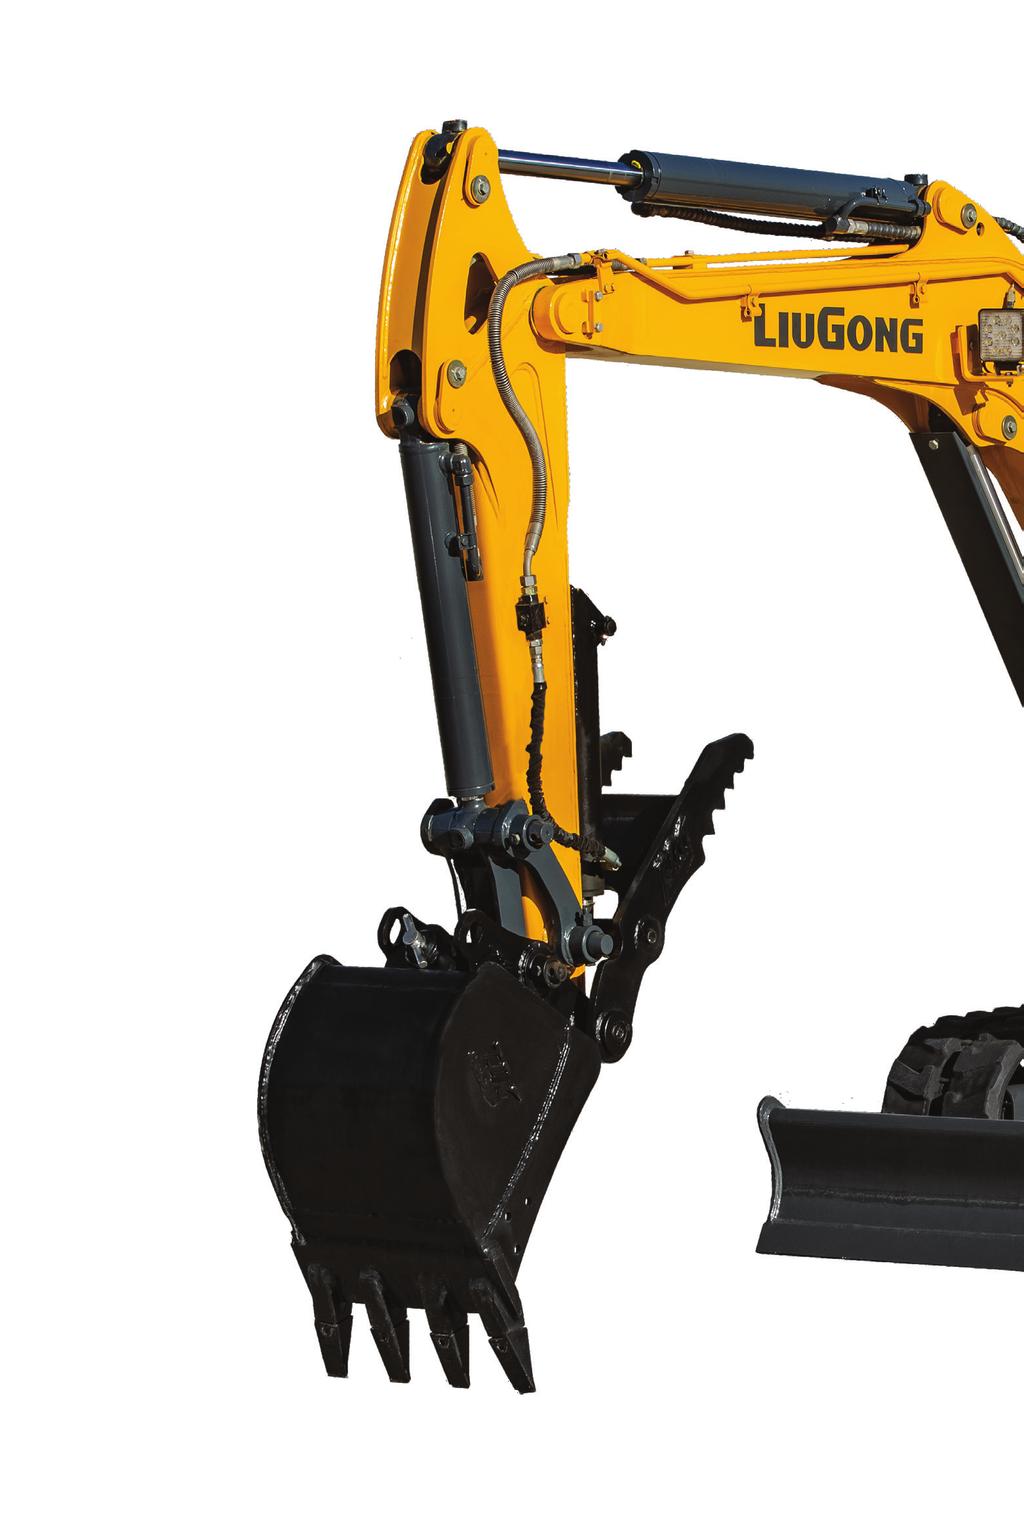 9035E EXCAVATOR UNBEATABLE RETURN ON YOUR INVESTMENT LiuGong 9035EZTS, Zero Tail Swing excavator, designed to maximize your productivity while offering a clear line of sight within a confined work